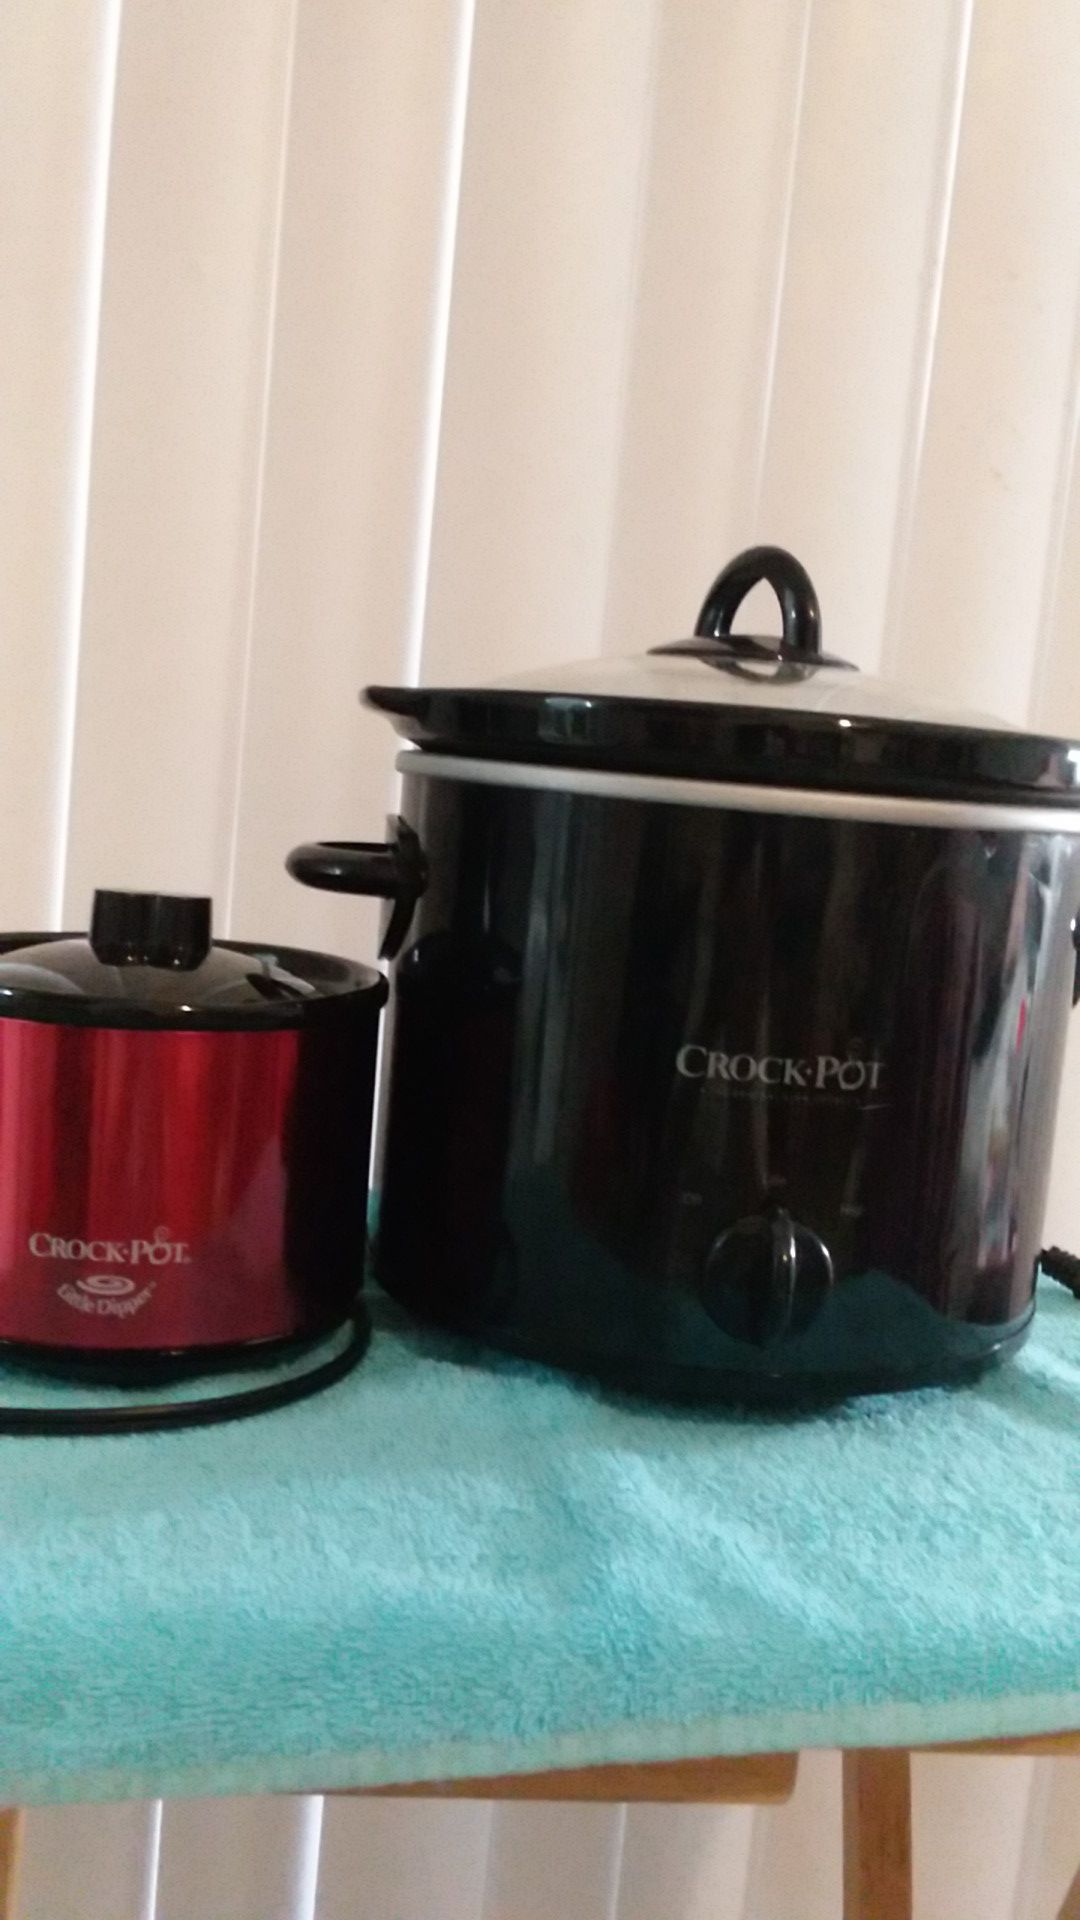 Crock pot one large one small